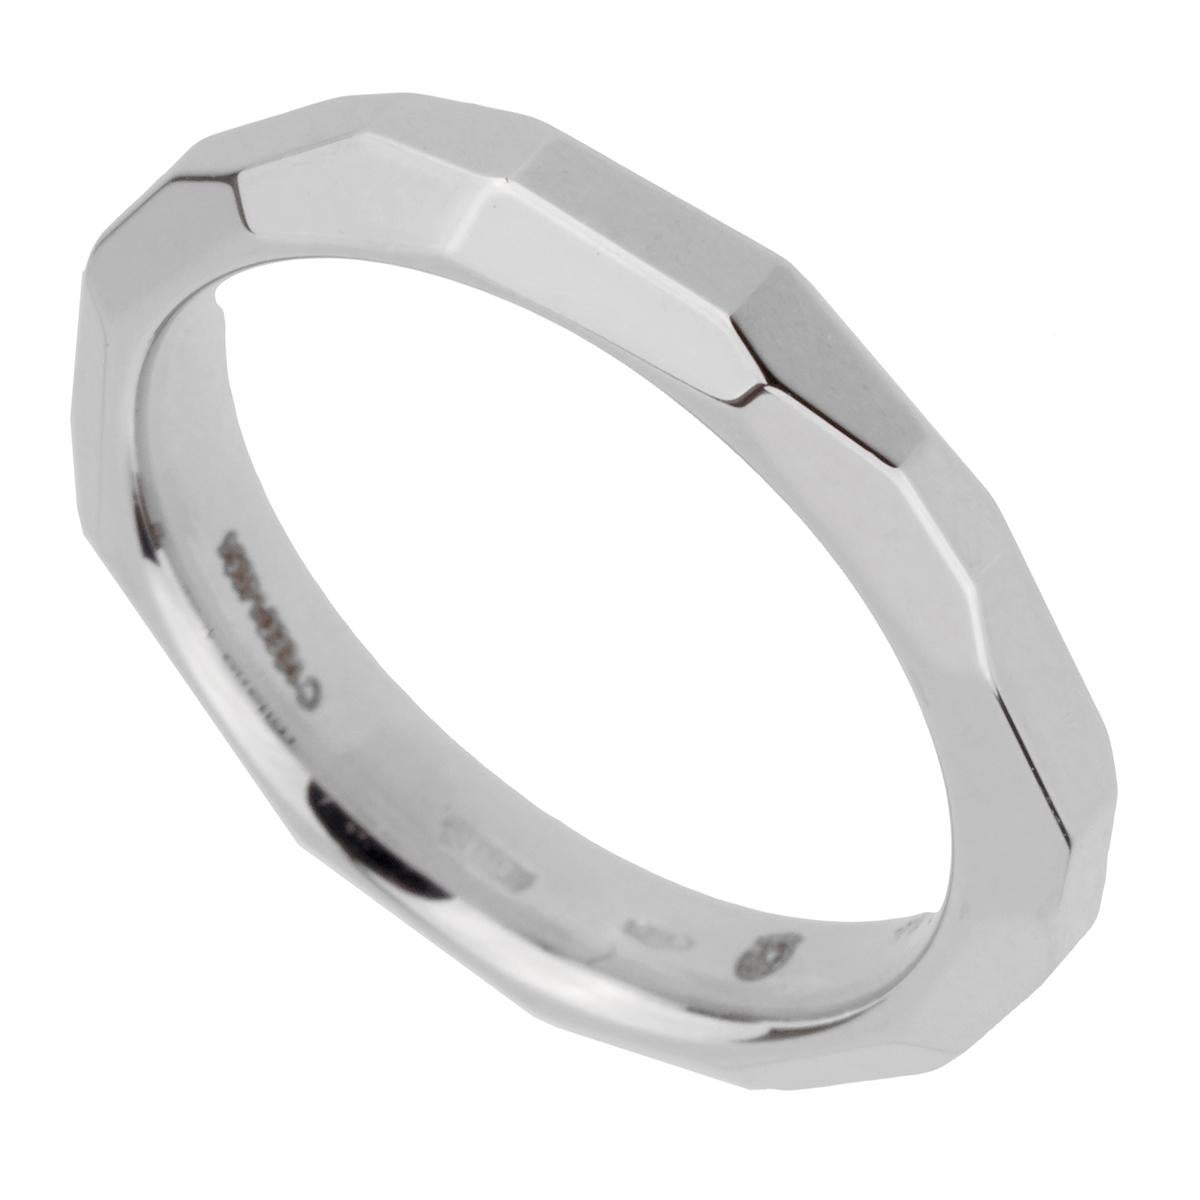 A chic white gold Pomellato band style ring crafted in 18k white gold, The ring measures a size 6.25 and can be resized.

Sku: 2380